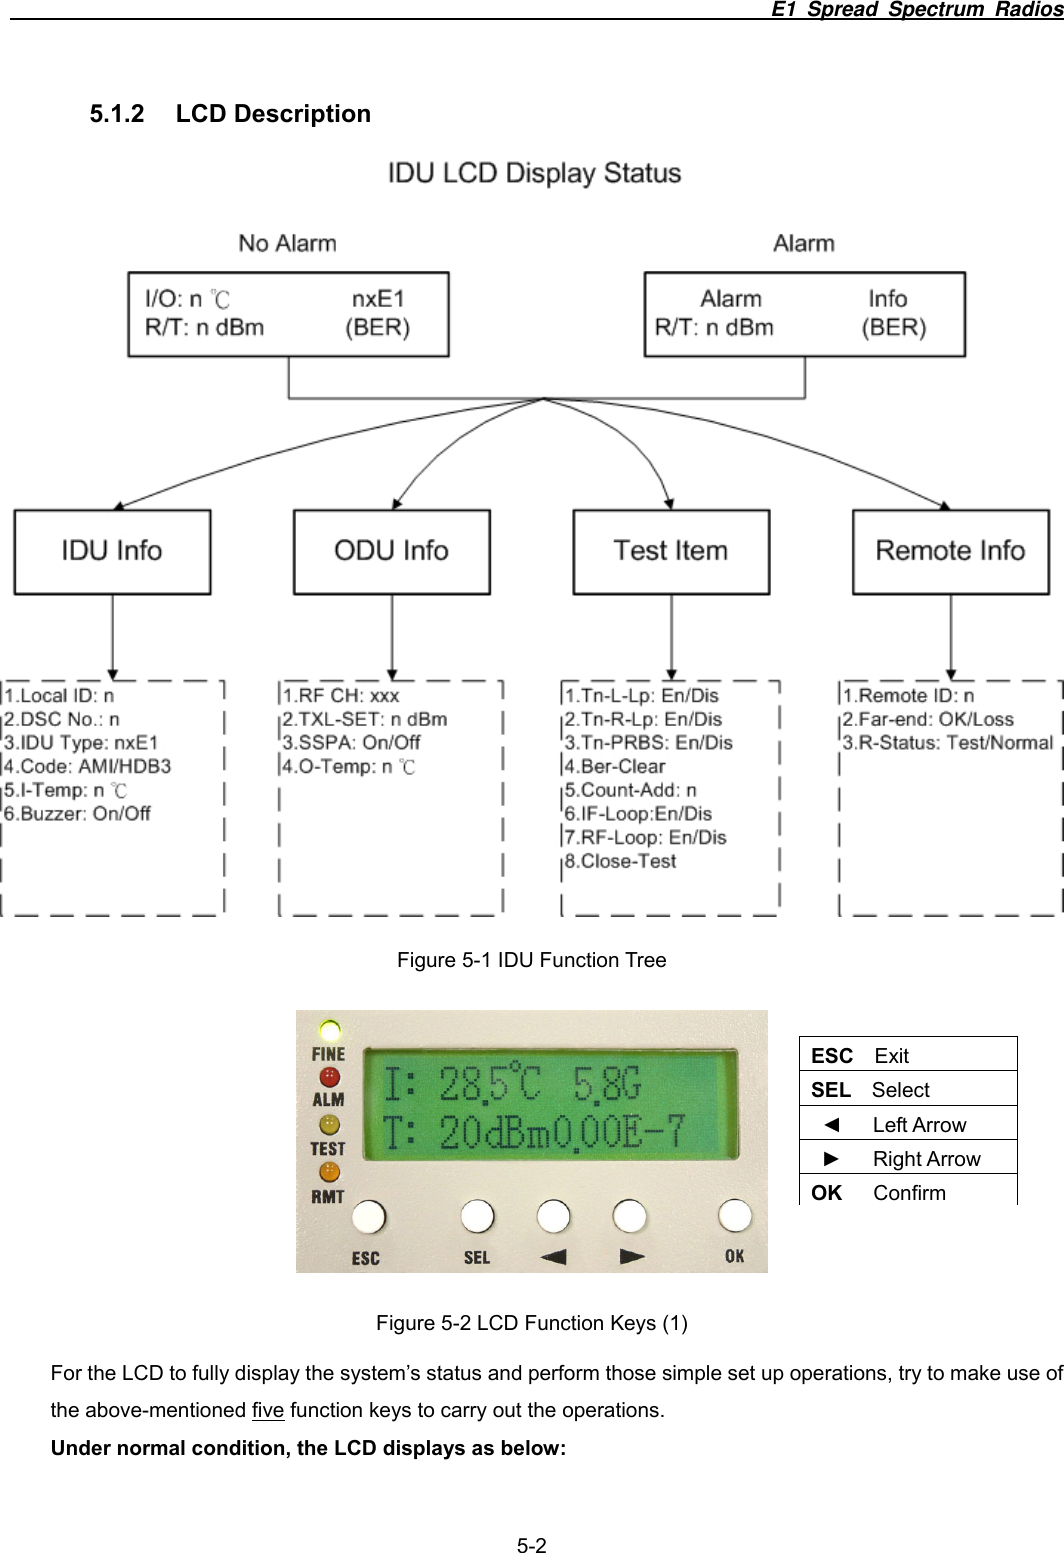                                                                          E1 Spread Spectrum Radios              5-2 5.1.2 LCD Description  Figure 5-1 IDU Function Tree  Figure 5-2 LCD Function Keys (1) For the LCD to fully display the system’s status and perform those simple set up operations, try to make use of the above-mentioned five function keys to carry out the operations. Under normal condition, the LCD displays as below:  ESC  Exit SEL  Select ◄   Left Arrow ►   Right Arrow OK   Confirm